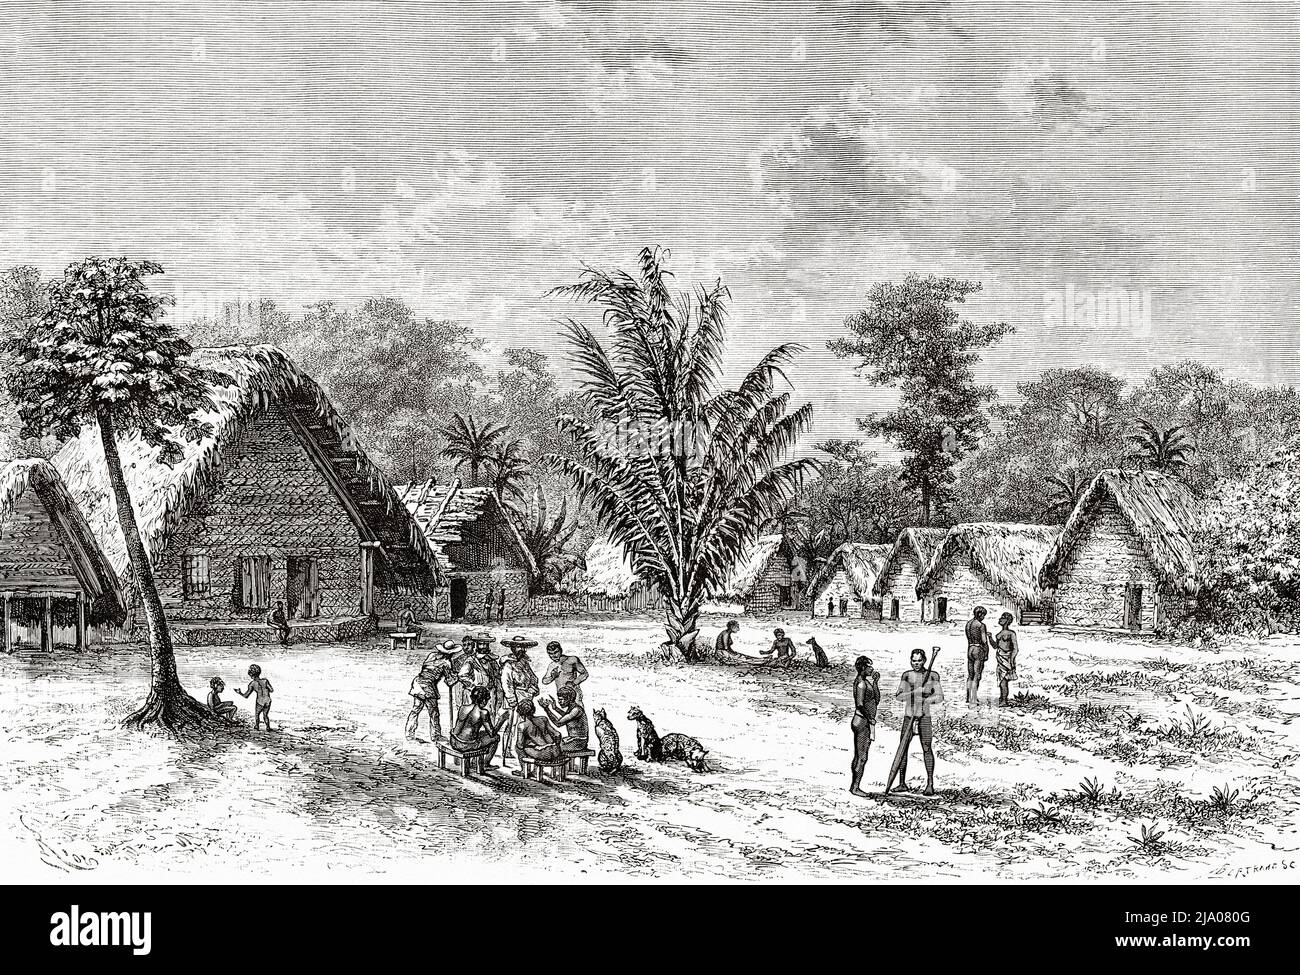 Boni Indians Village, French Guiana, Department of France, South America. Voyage of exploration in the interior of the Guianas 1877 by Jules Crevaux. Le Tour du Monde 1879 Stock Photo